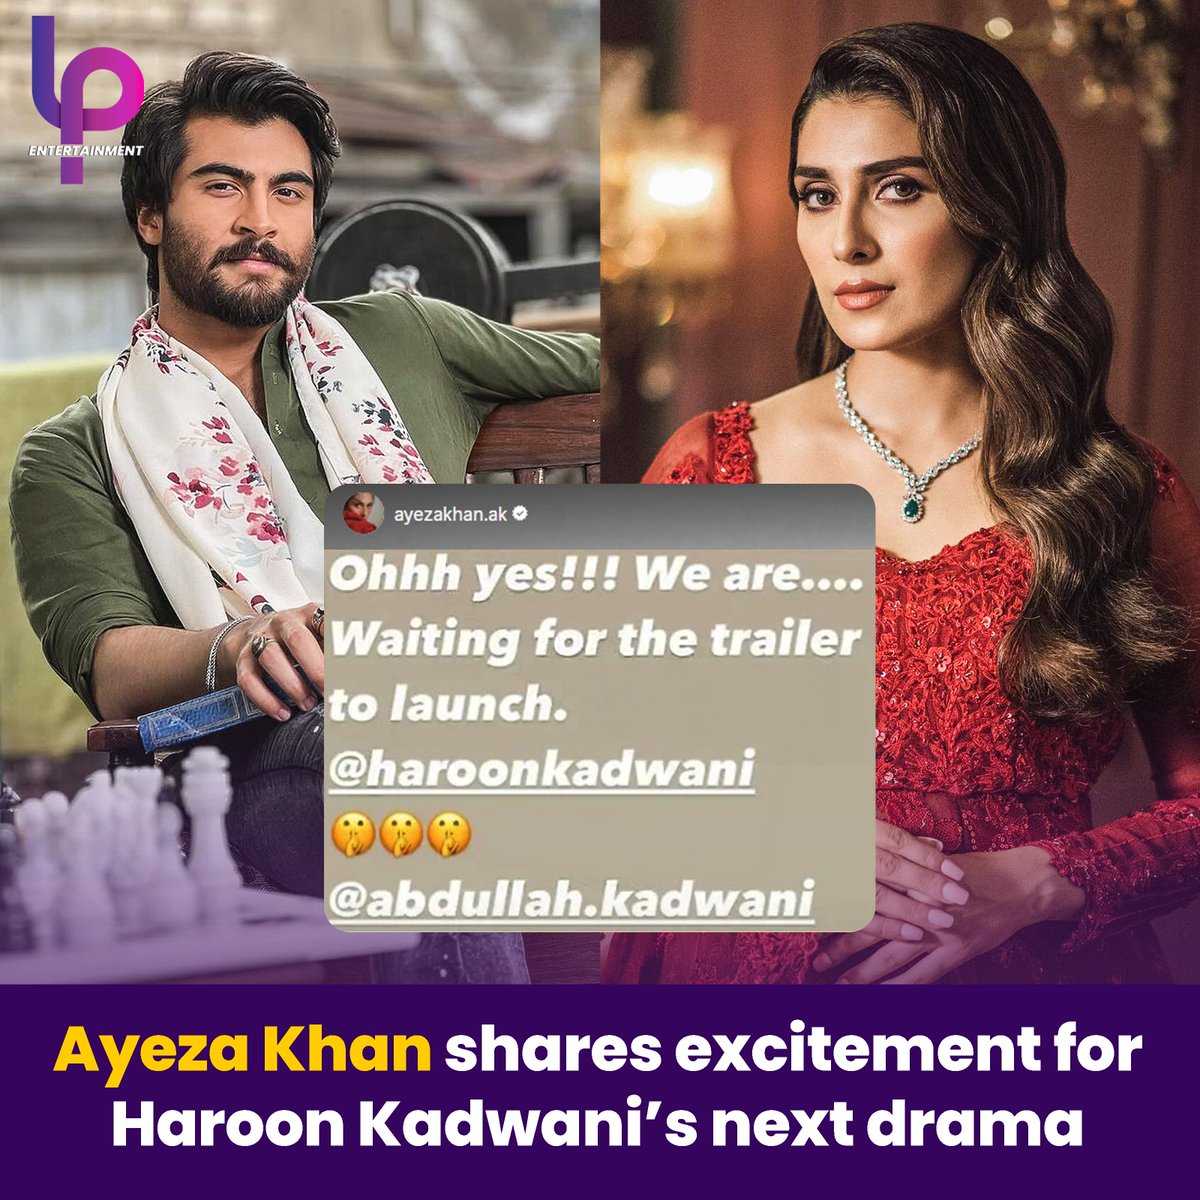 Ayeza Khan is just curious and excited for Haroon Kadwani's upcoming drama serial and we are curious too to know what's cooking between them. 📷📷
#AyezaKhan #HaroonKadwani #AbdullahKadwani #7thSkyEntertainment #LPEntertainment #UpcomingDramas #KomalMeer